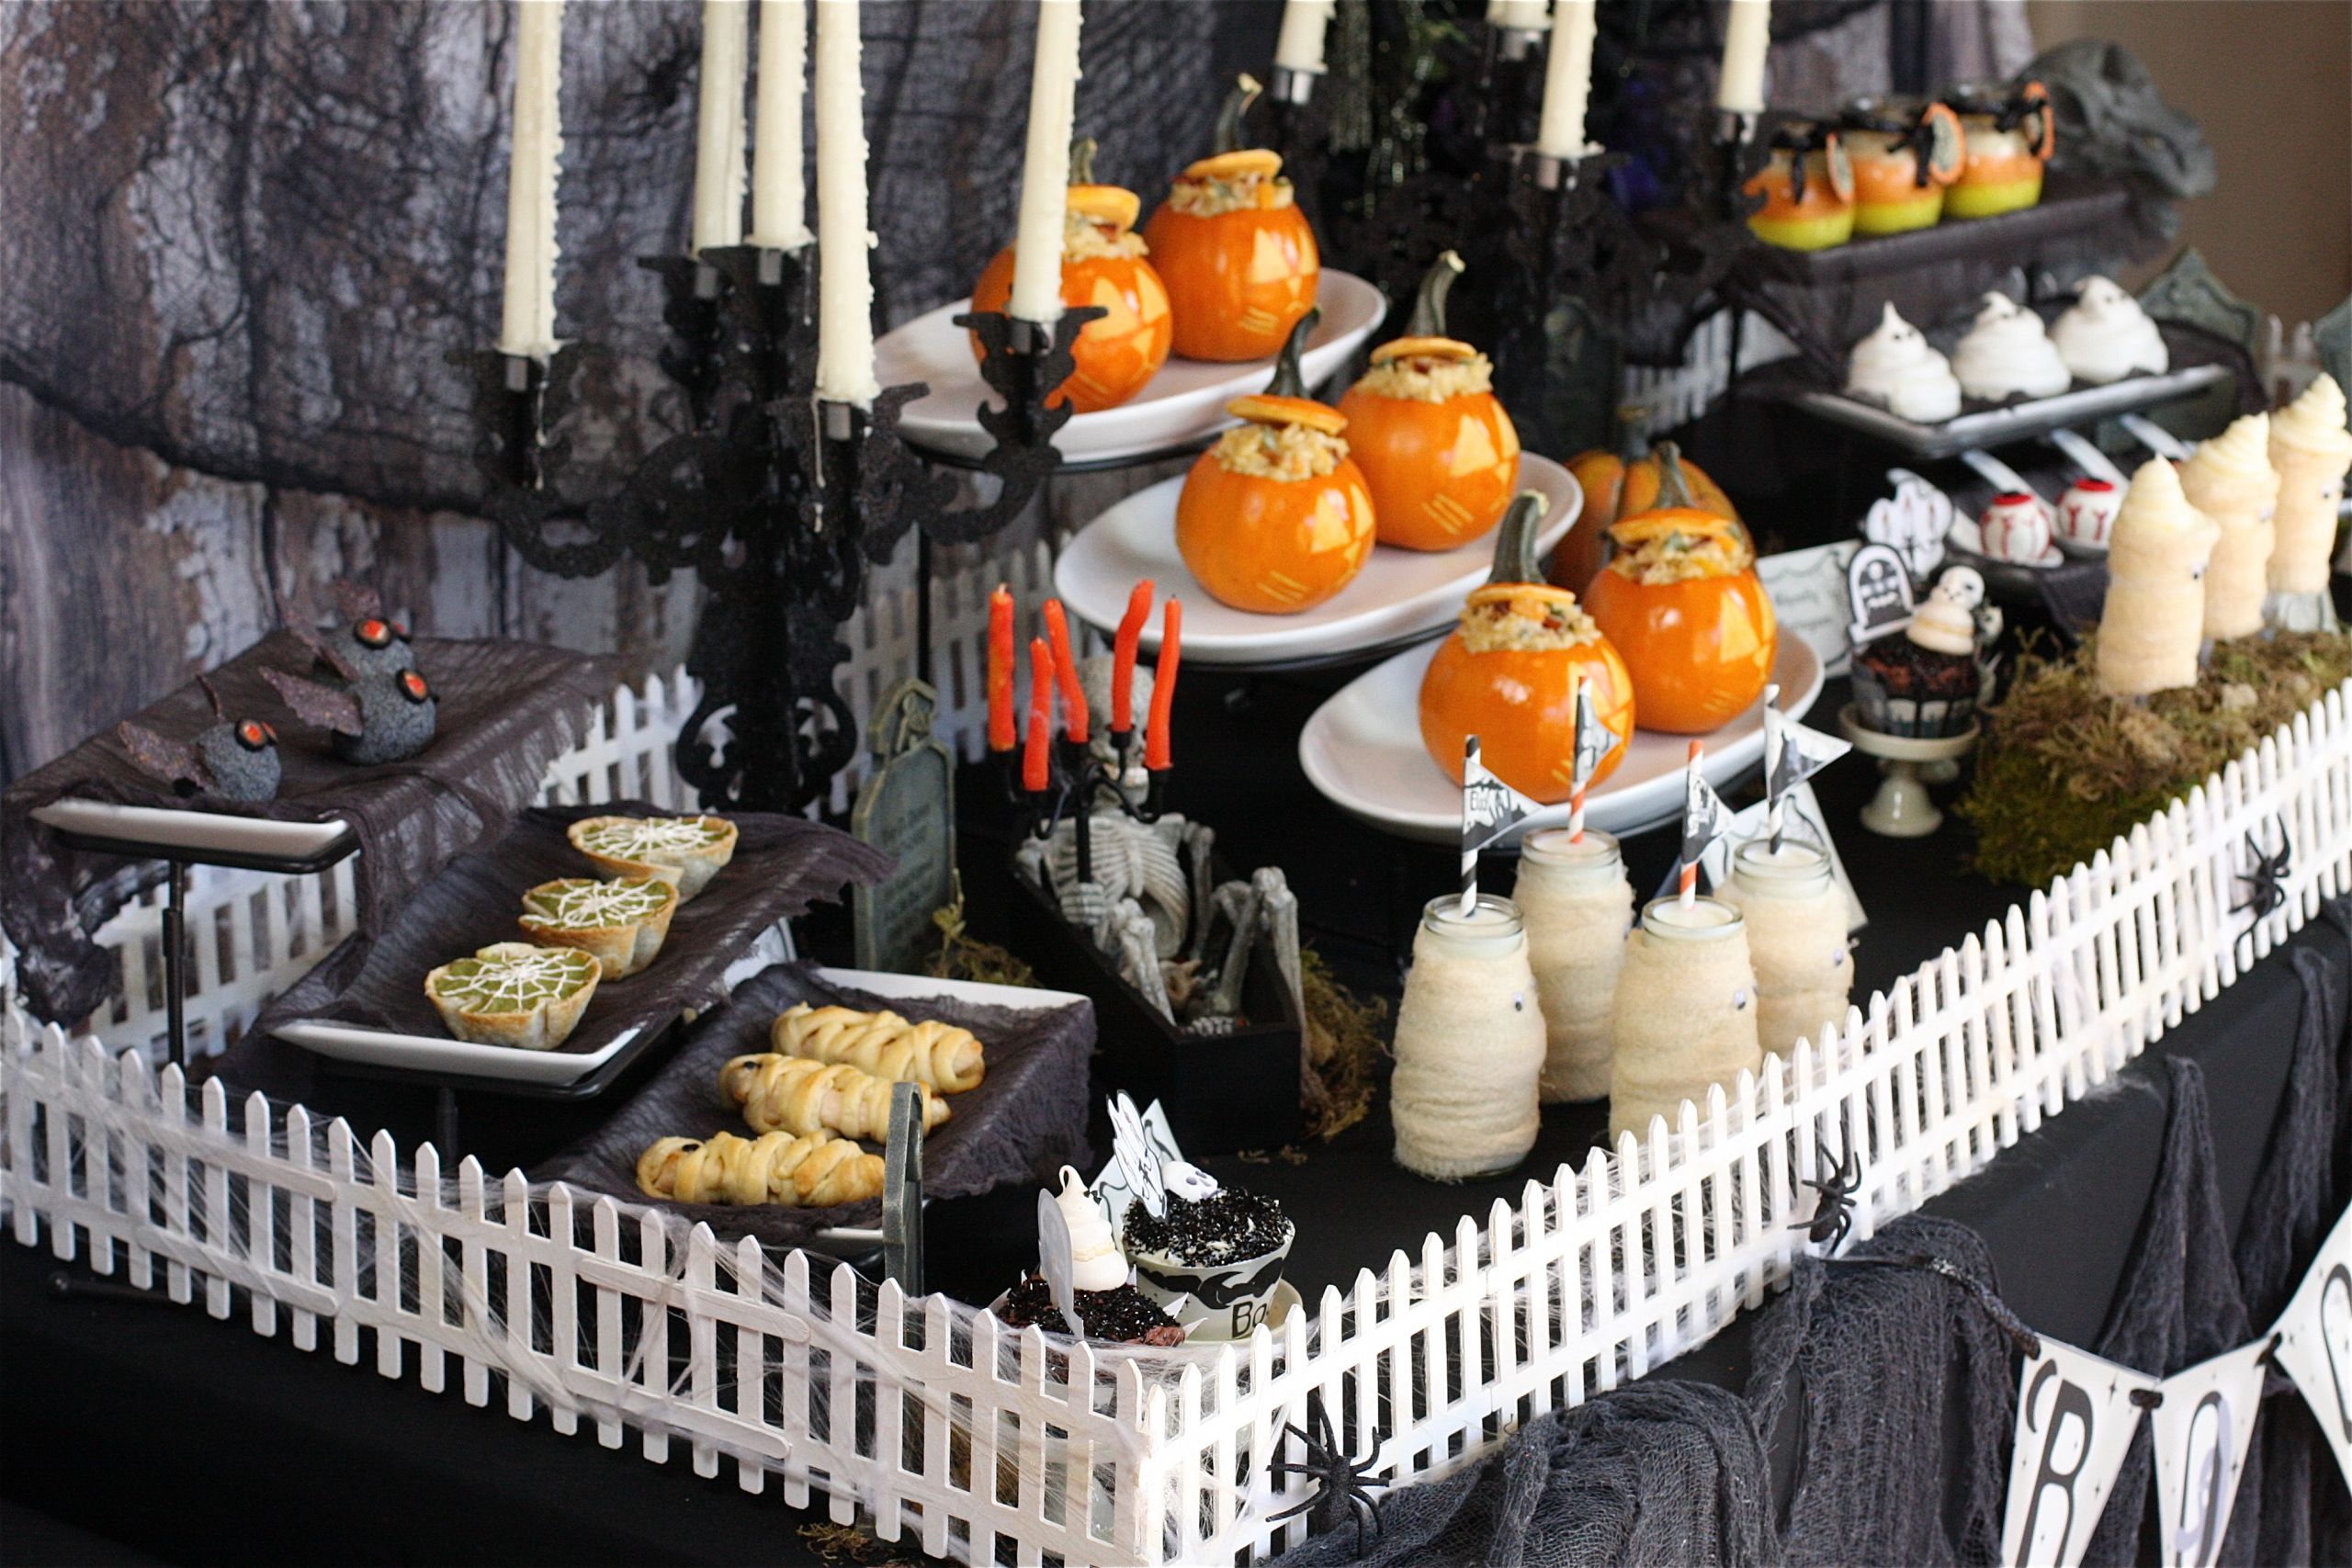 Table Decorating Ideas For Halloween Party
 Sneak Peek at Our Halloween Party Table Plus Free